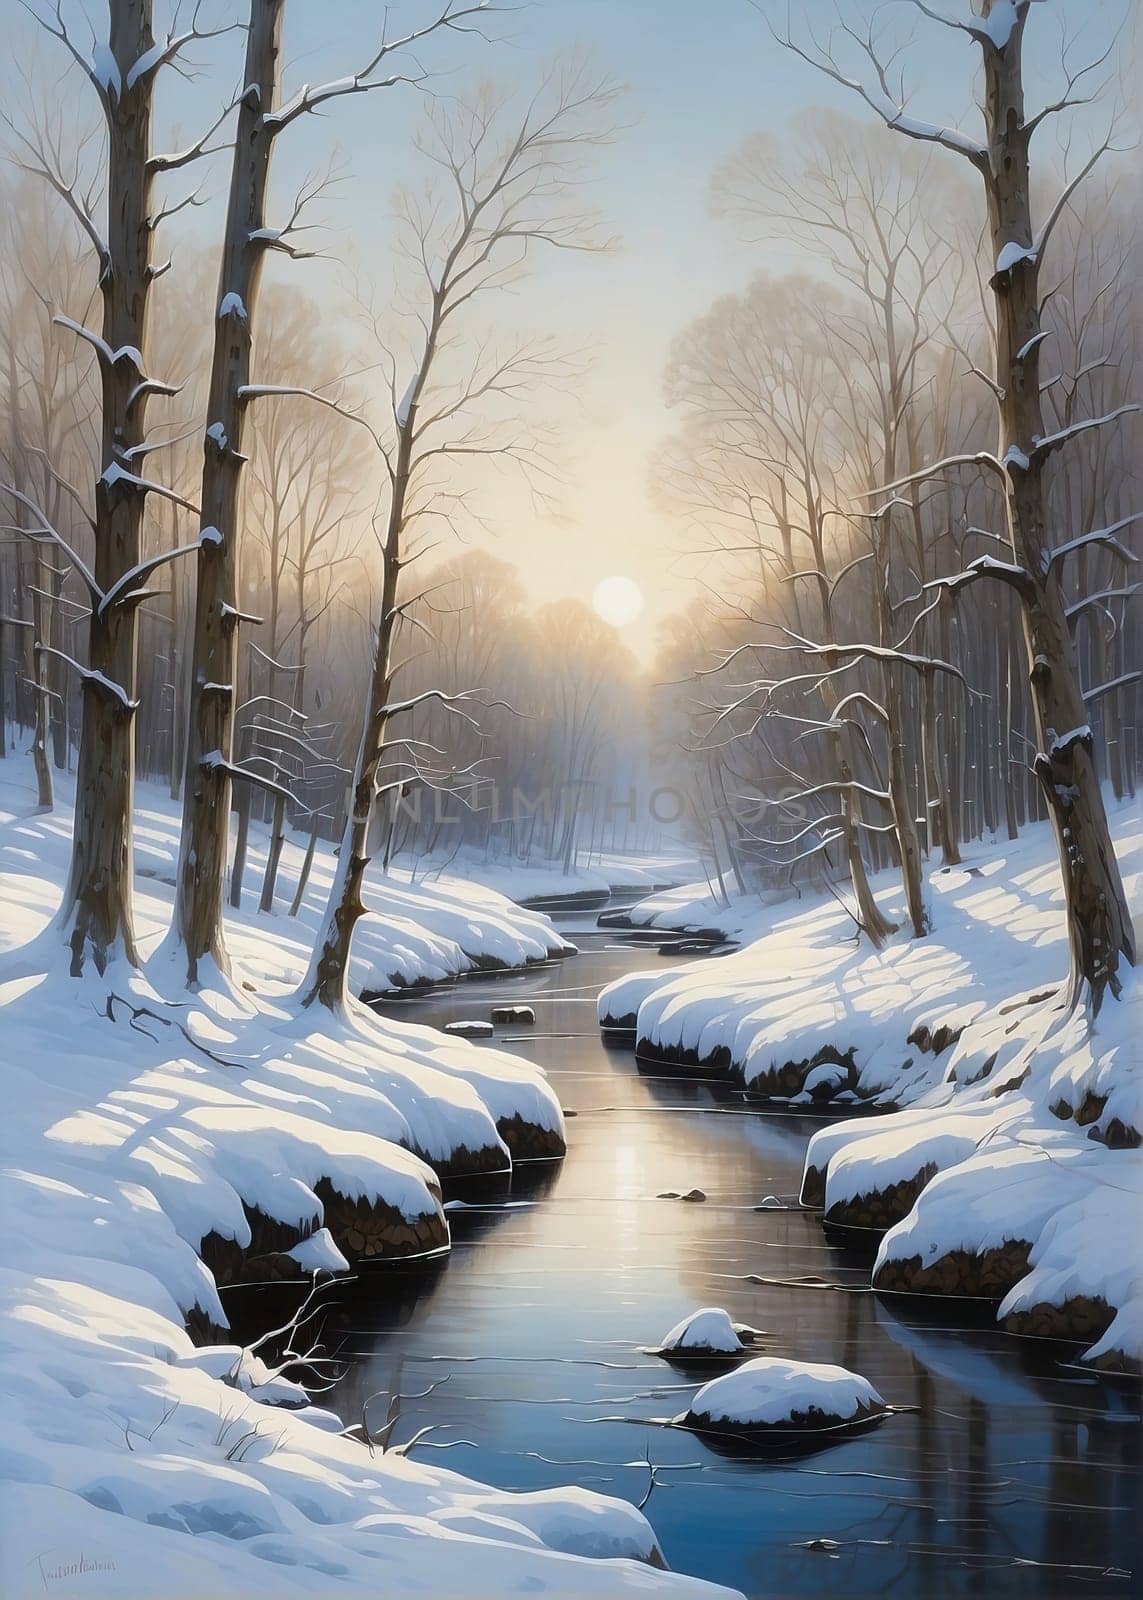 Stream in the winter forest by applesstock